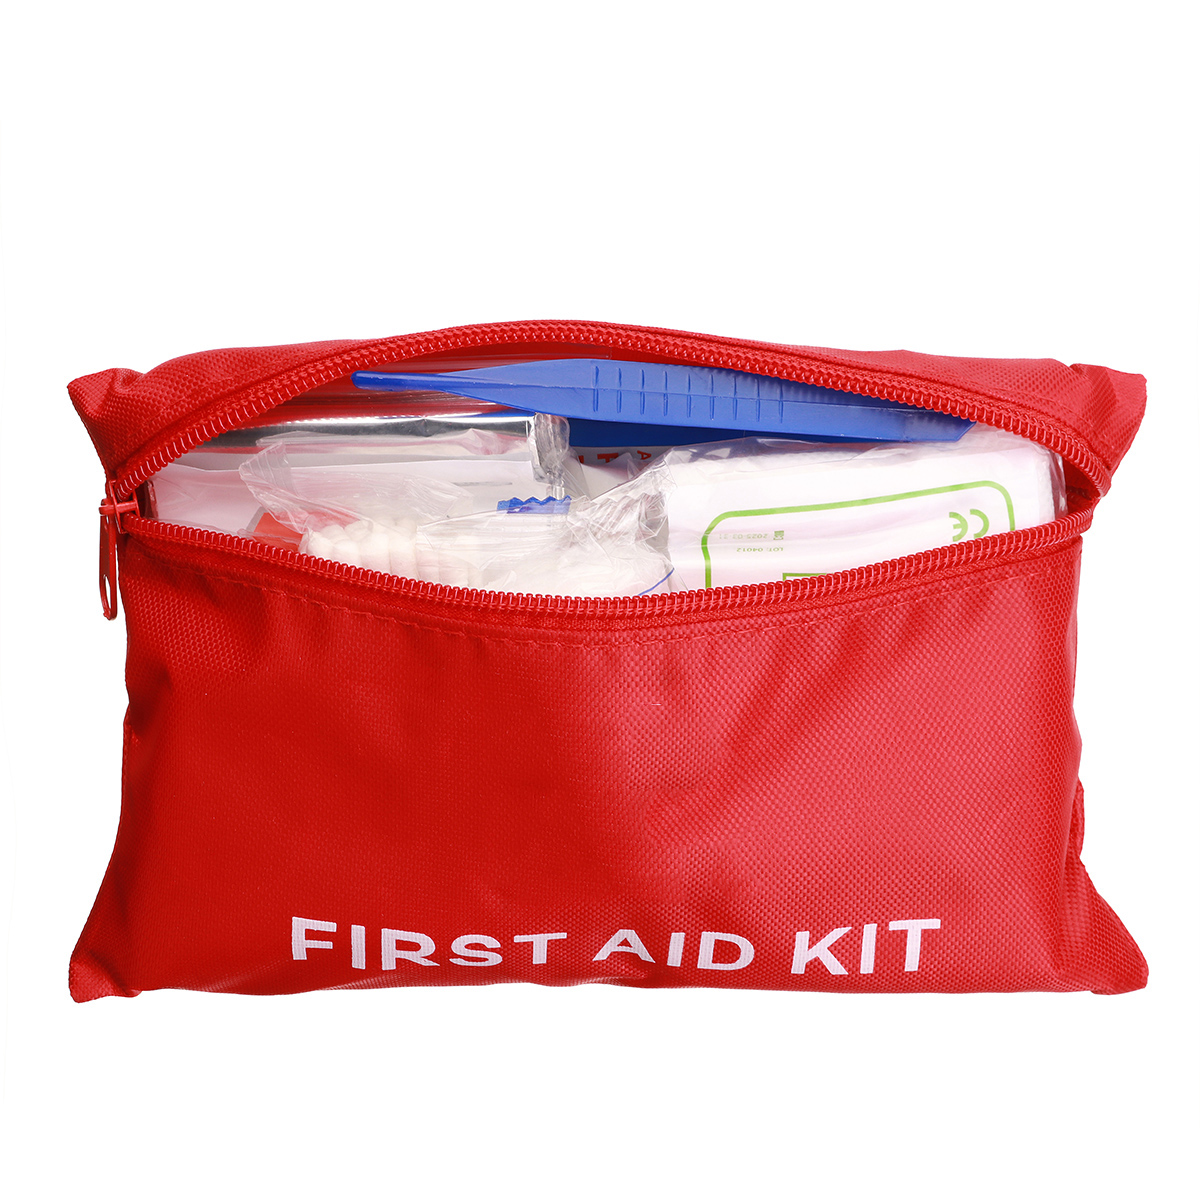 100177243-Pcs-First-Aid-Kit-Survival-Tactical-Emergency-Equipment-with-Fishing-Tackle-Lifeguard-Blan-1809173-5